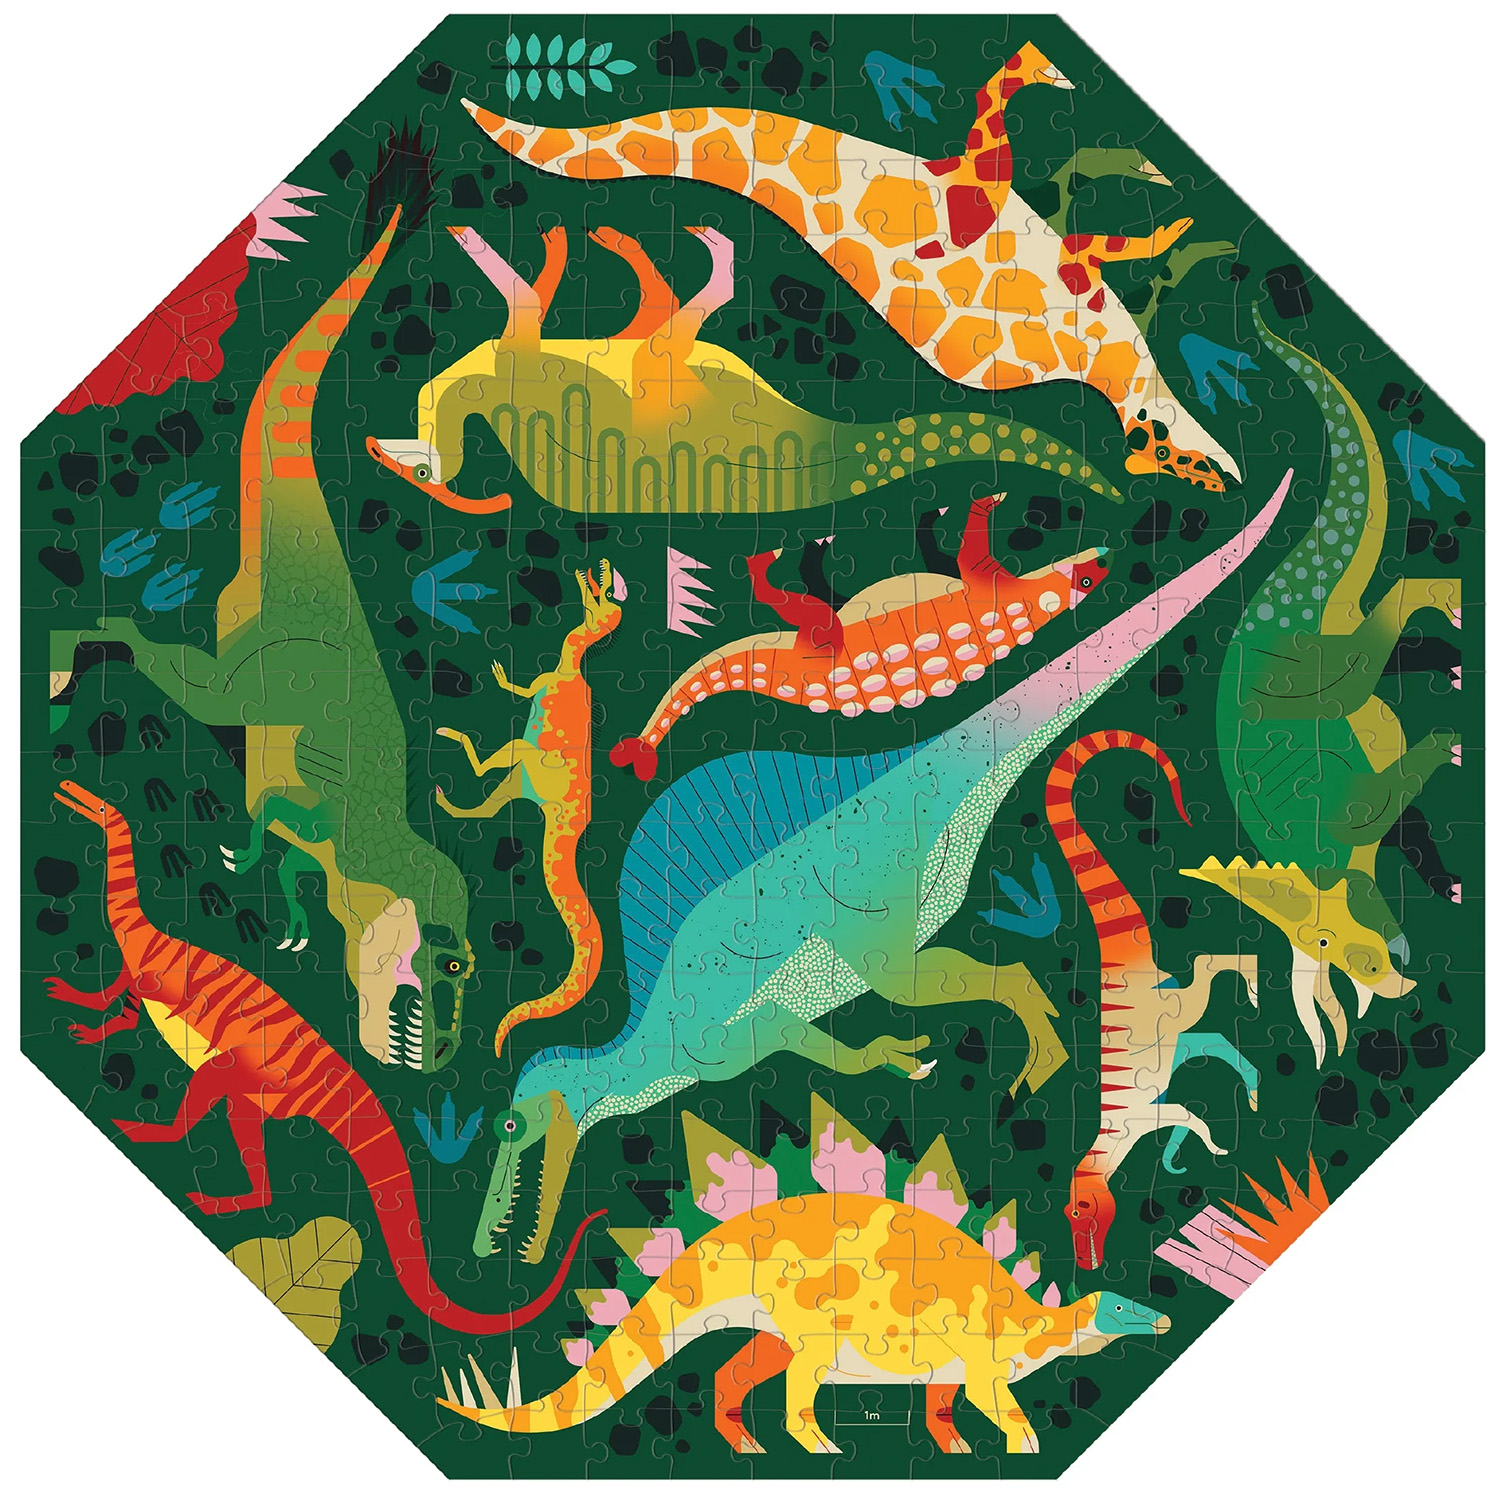 Dinosaurs to Scale Octagon Shaped Puzzle Dinosaurs Shaped Puzzle